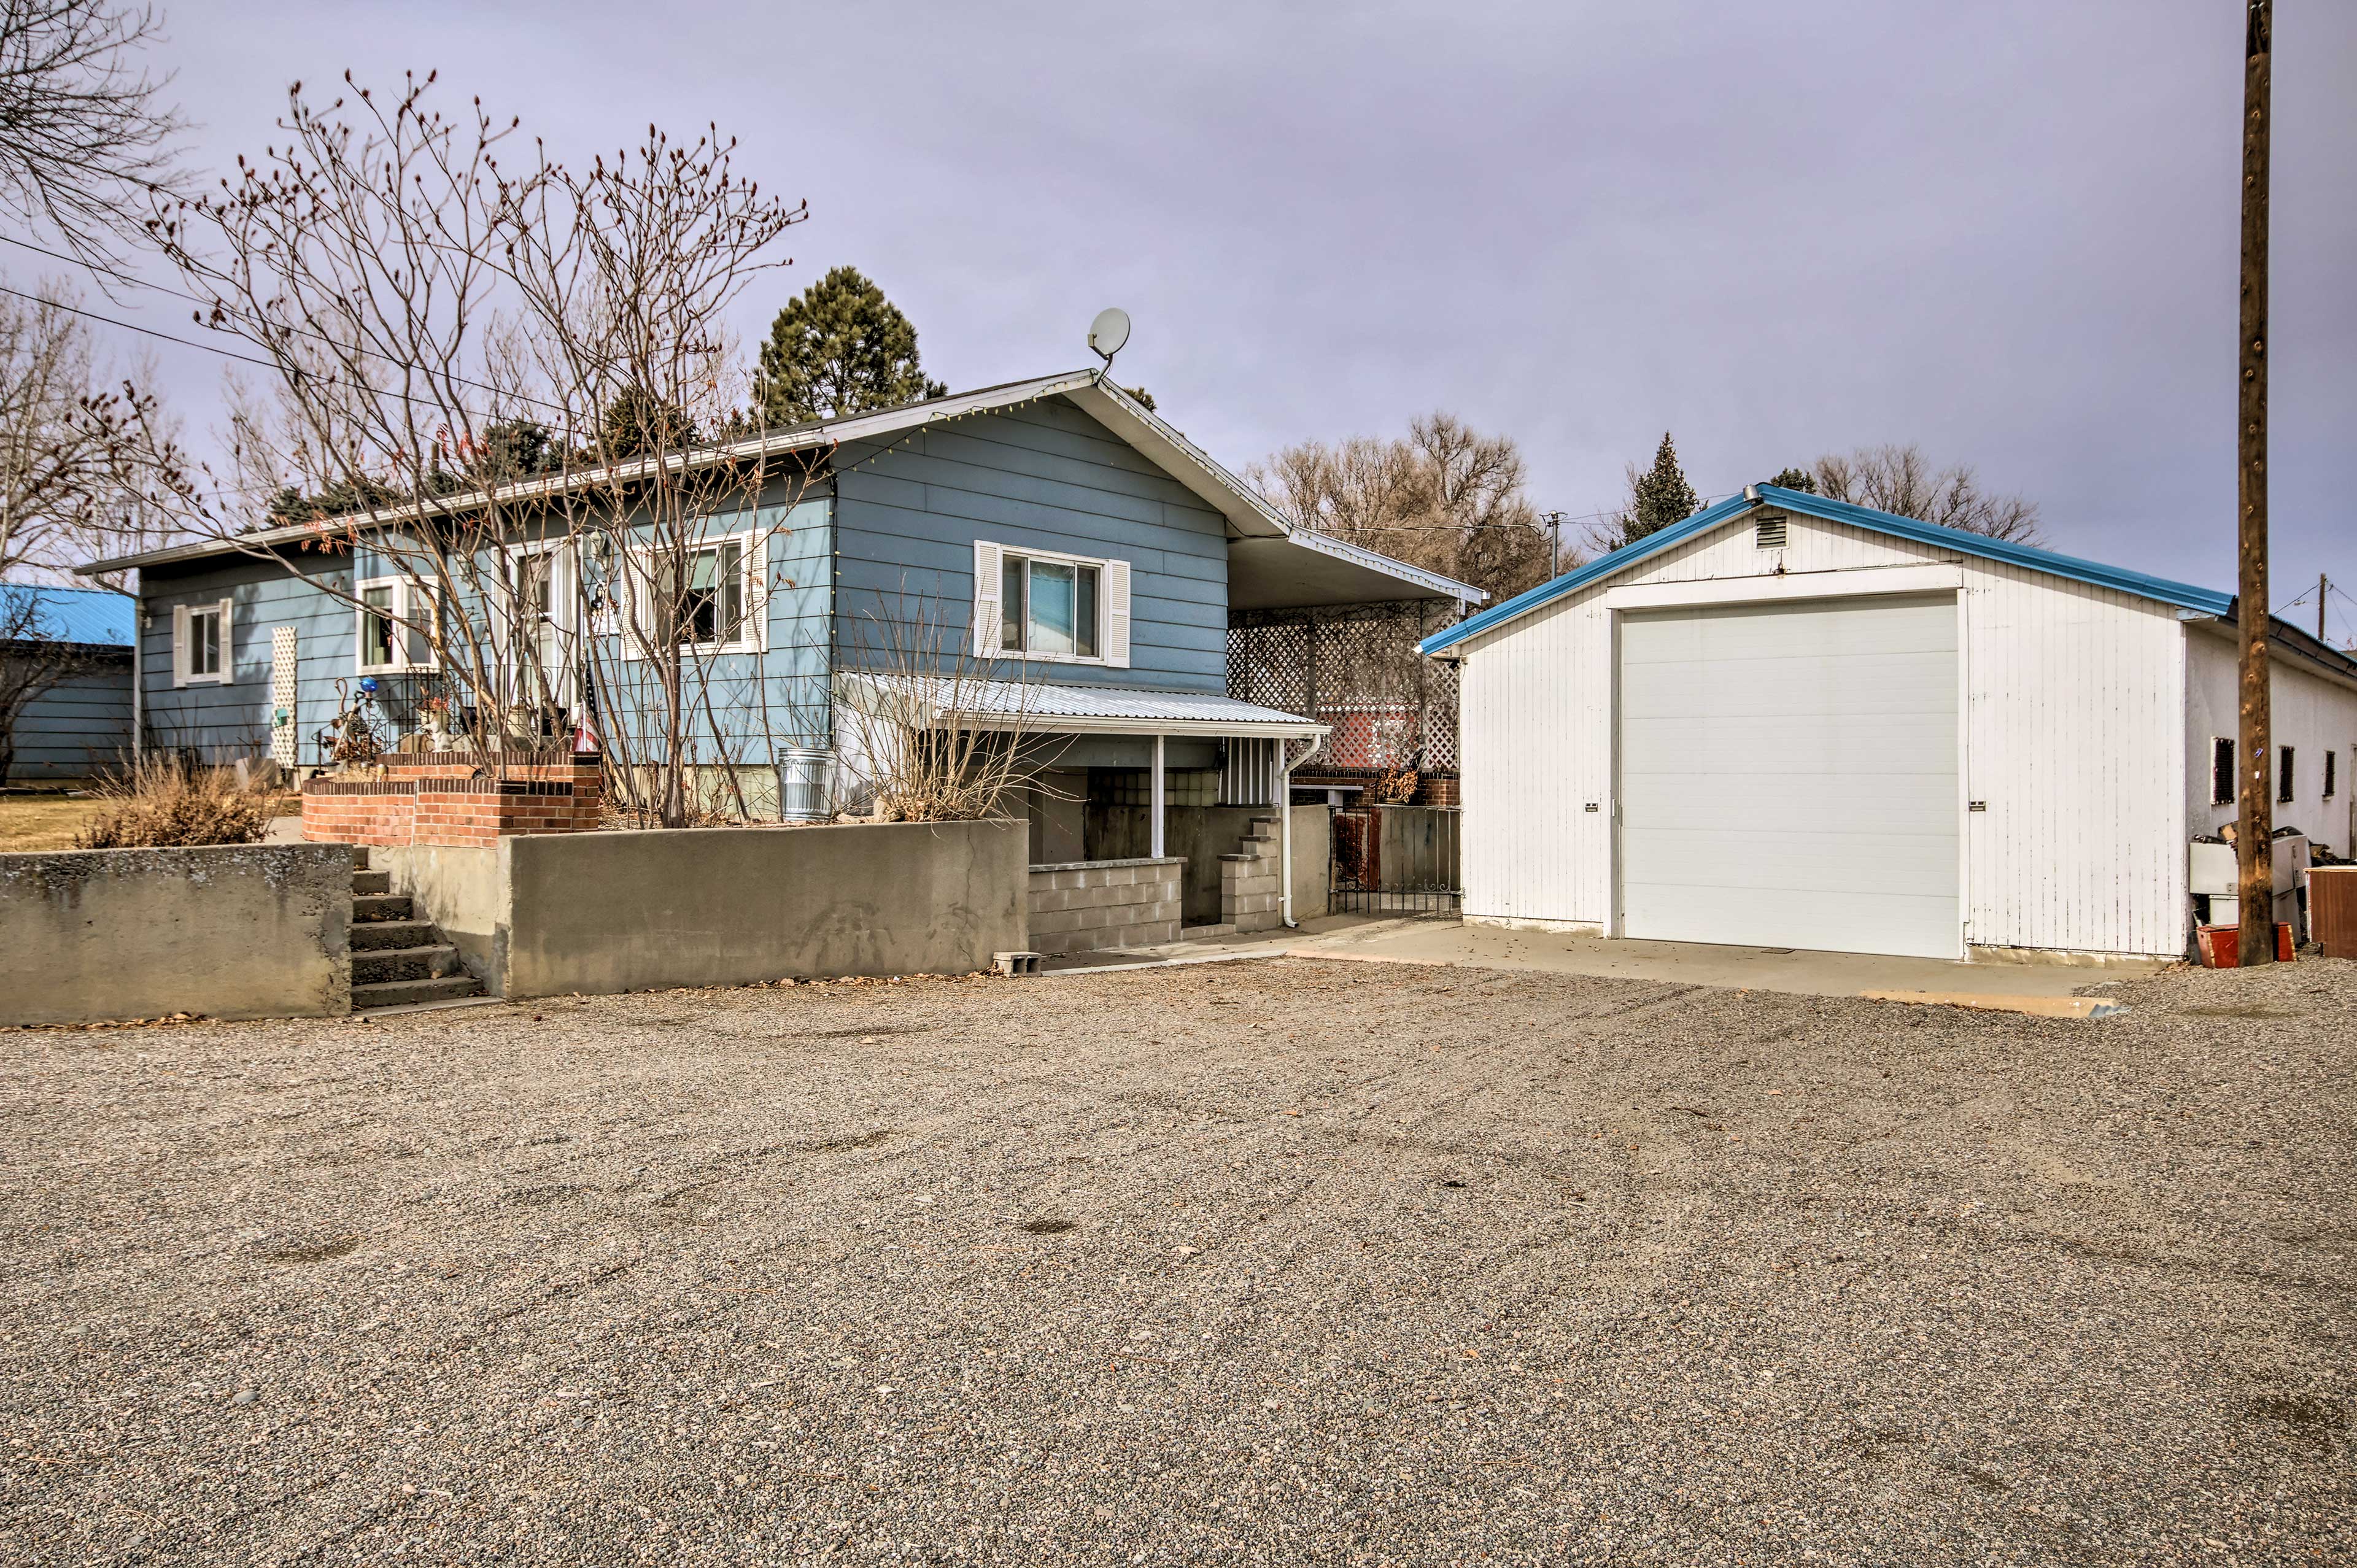 Parking | Driveway (4 Vehicles) | RV/Trailer Parking Available